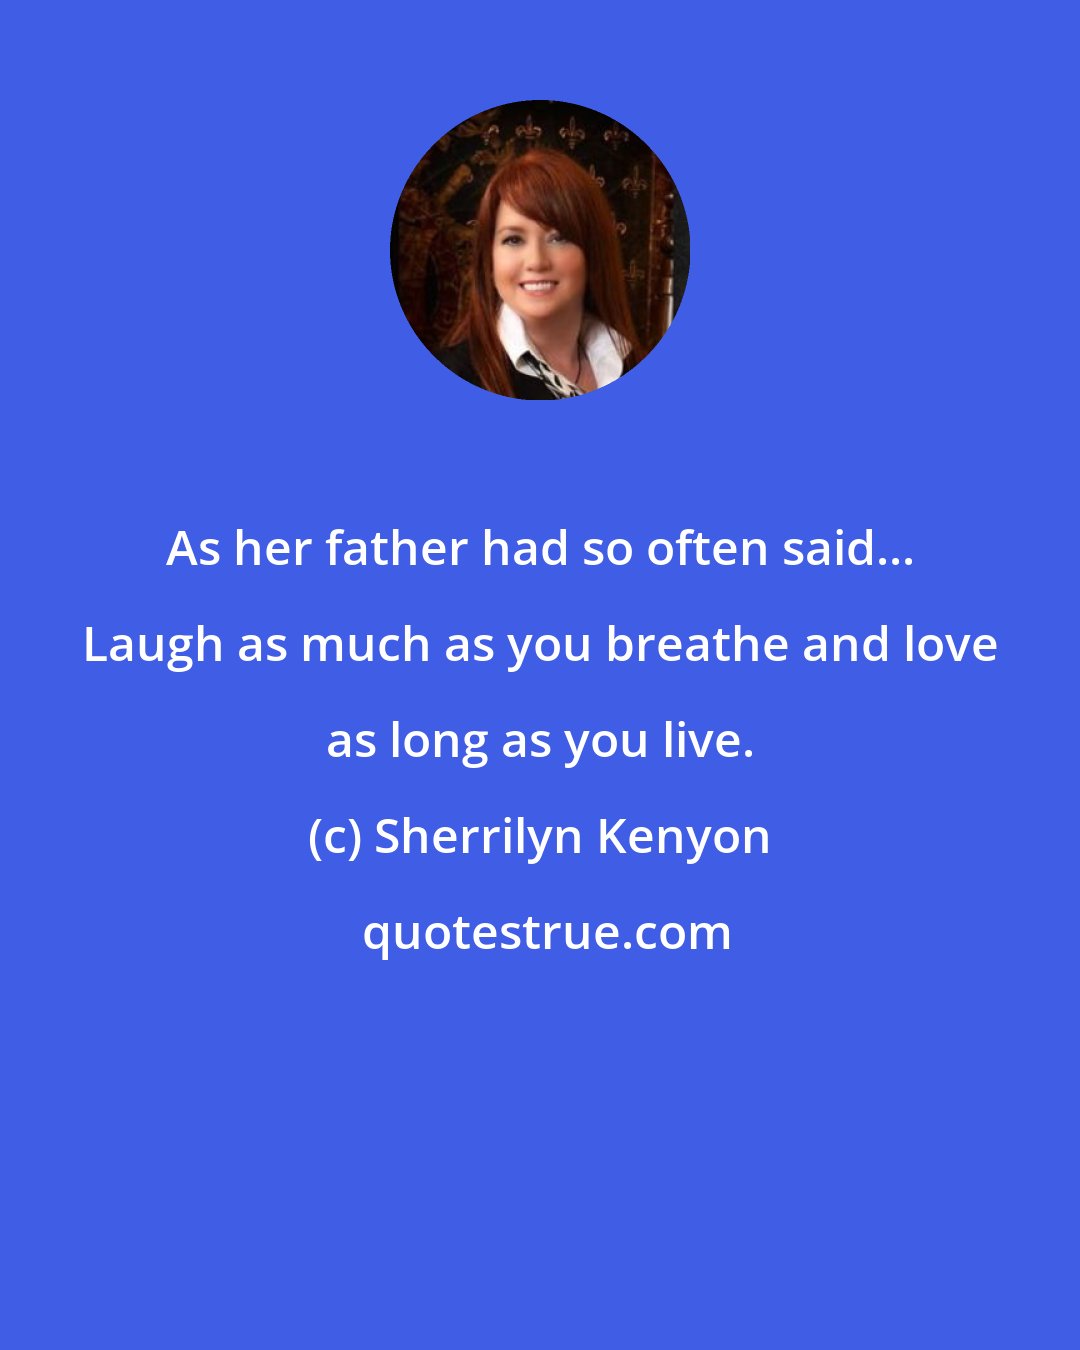 Sherrilyn Kenyon: As her father had so often said... Laugh as much as you breathe and love as long as you live.